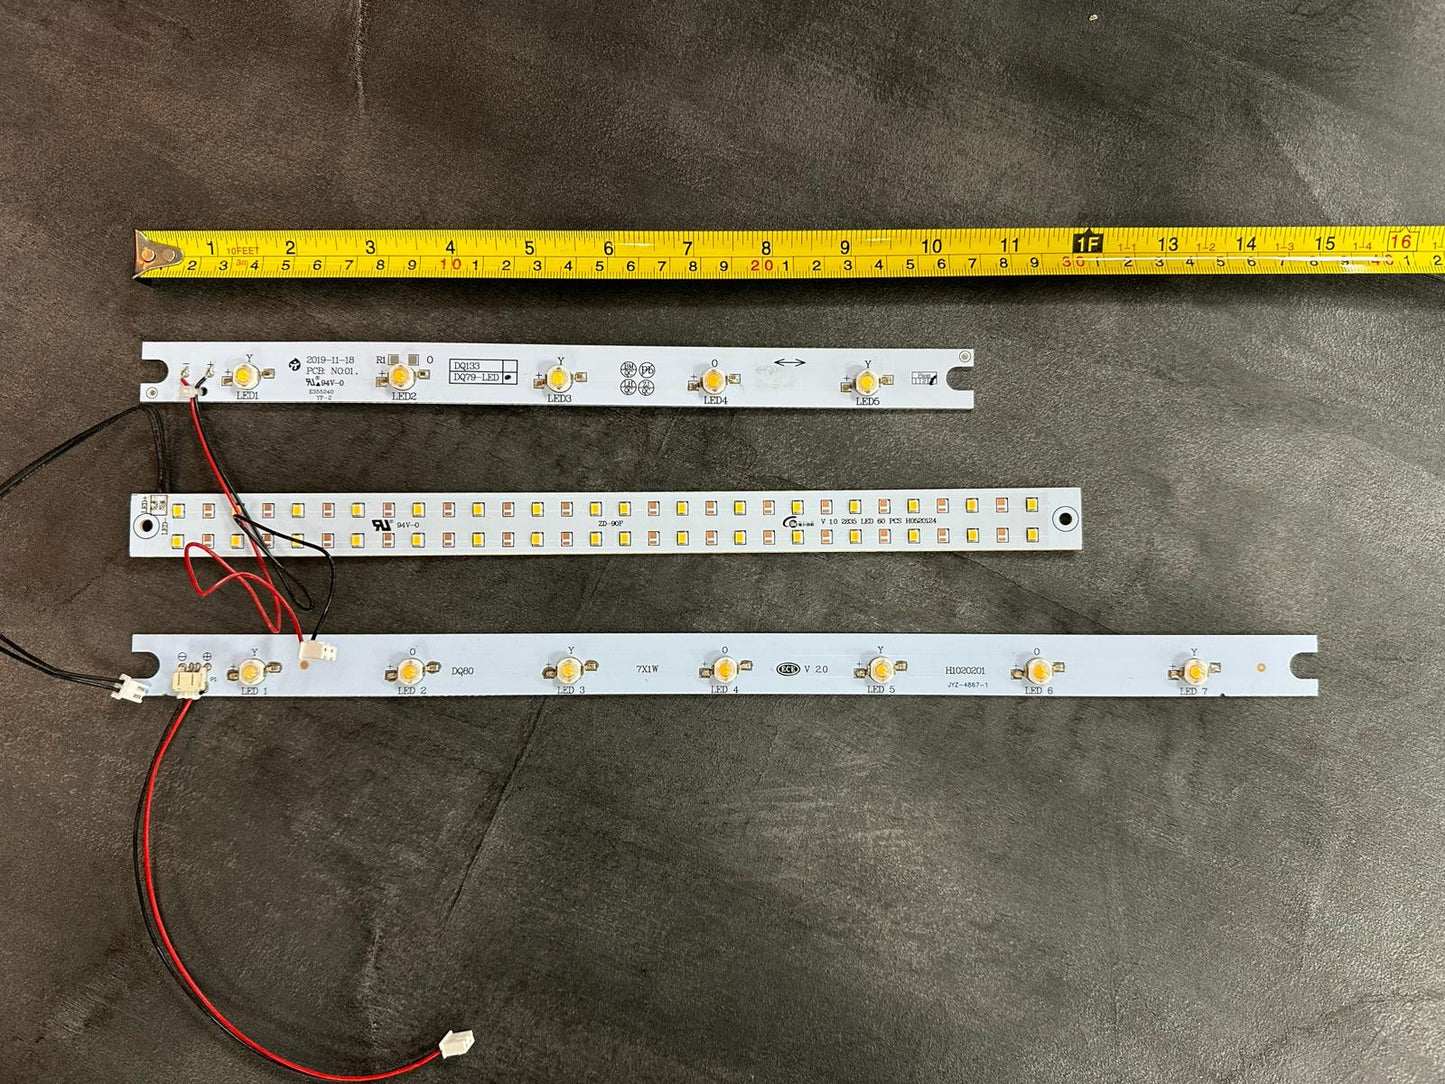 3 LED Strips for Adam fires with tape measure for size comparison 